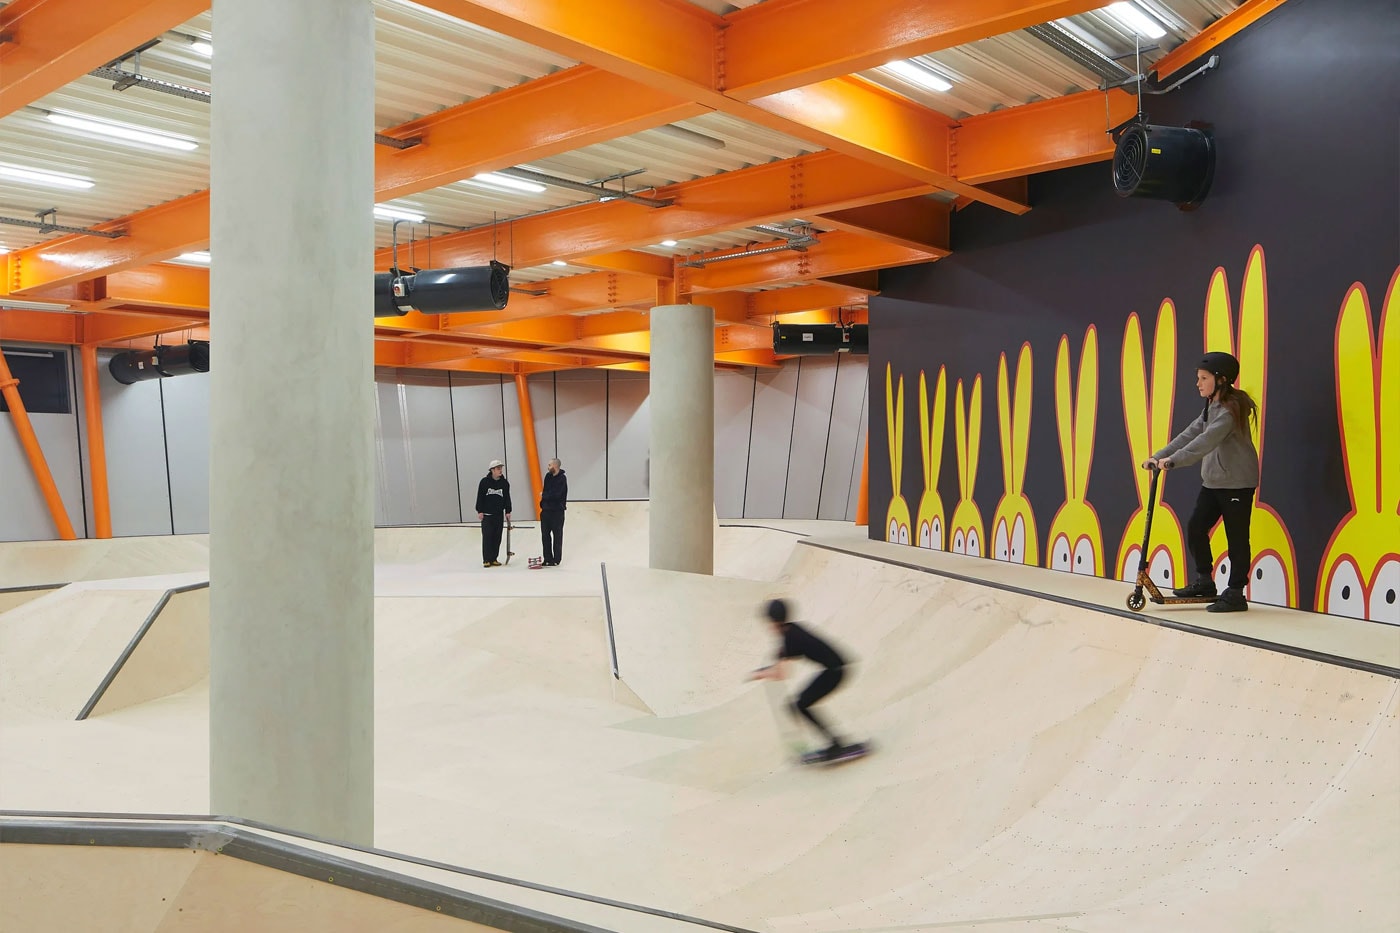 Hollaway Studio Designs the World's First Multi Floor Skatepark climbing wall three stories adrenaline building boxing gym cafe space central hub for youth 